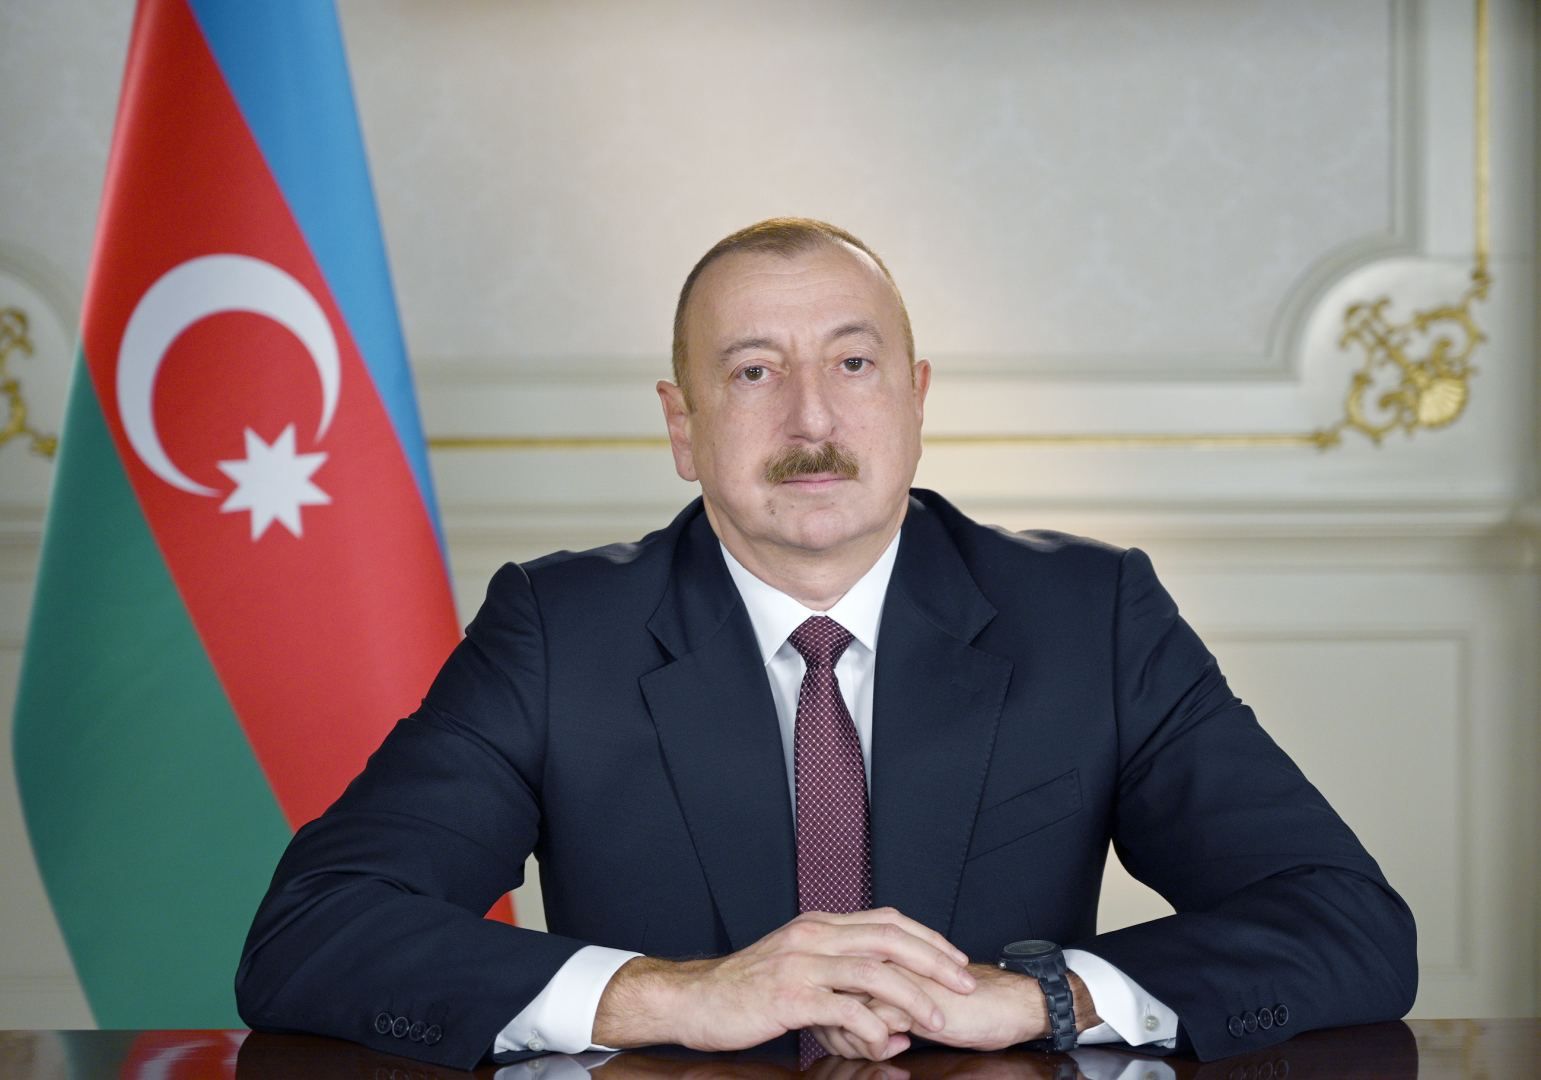 Group of Azerbaijani education workers granted title of 'Honored teacher' – decree